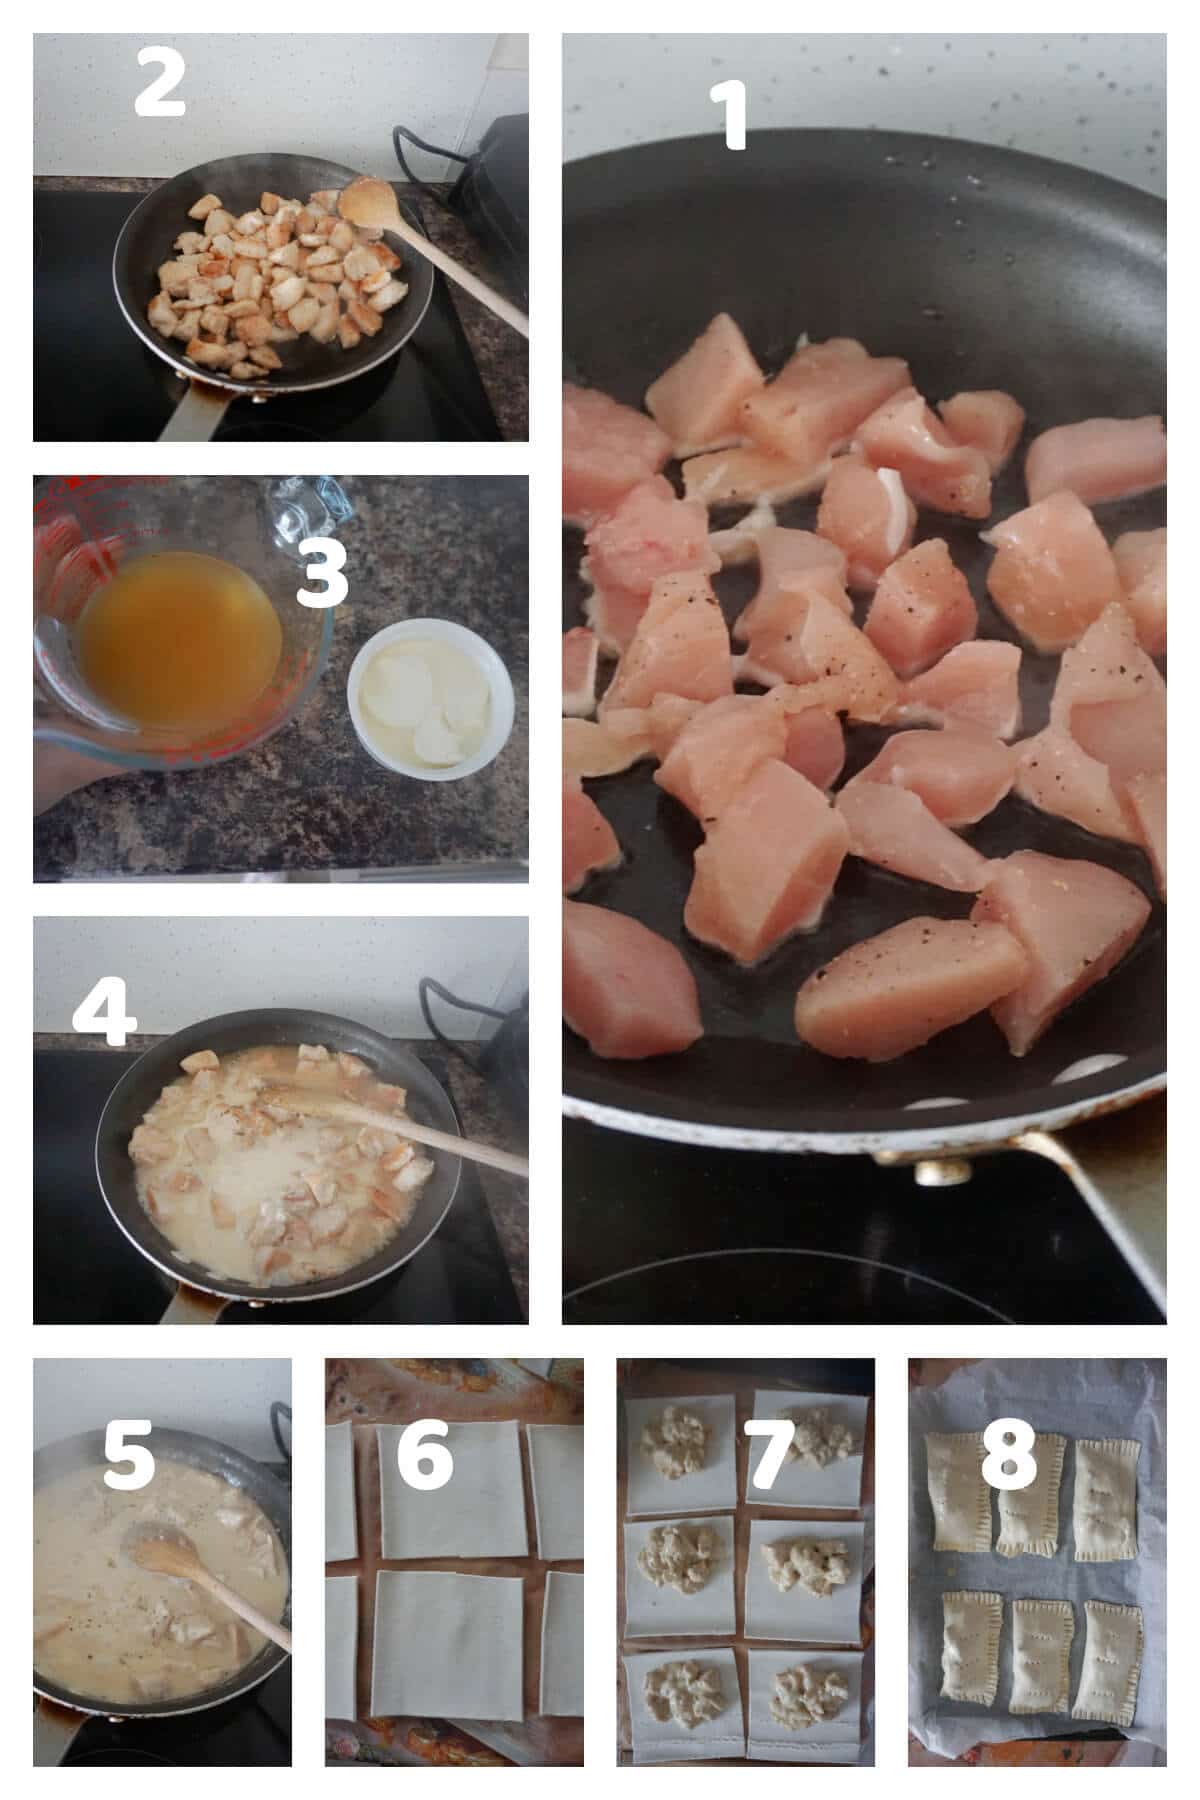 Collage of 8 photos to show how to make Gregg's chicken bake recipe.